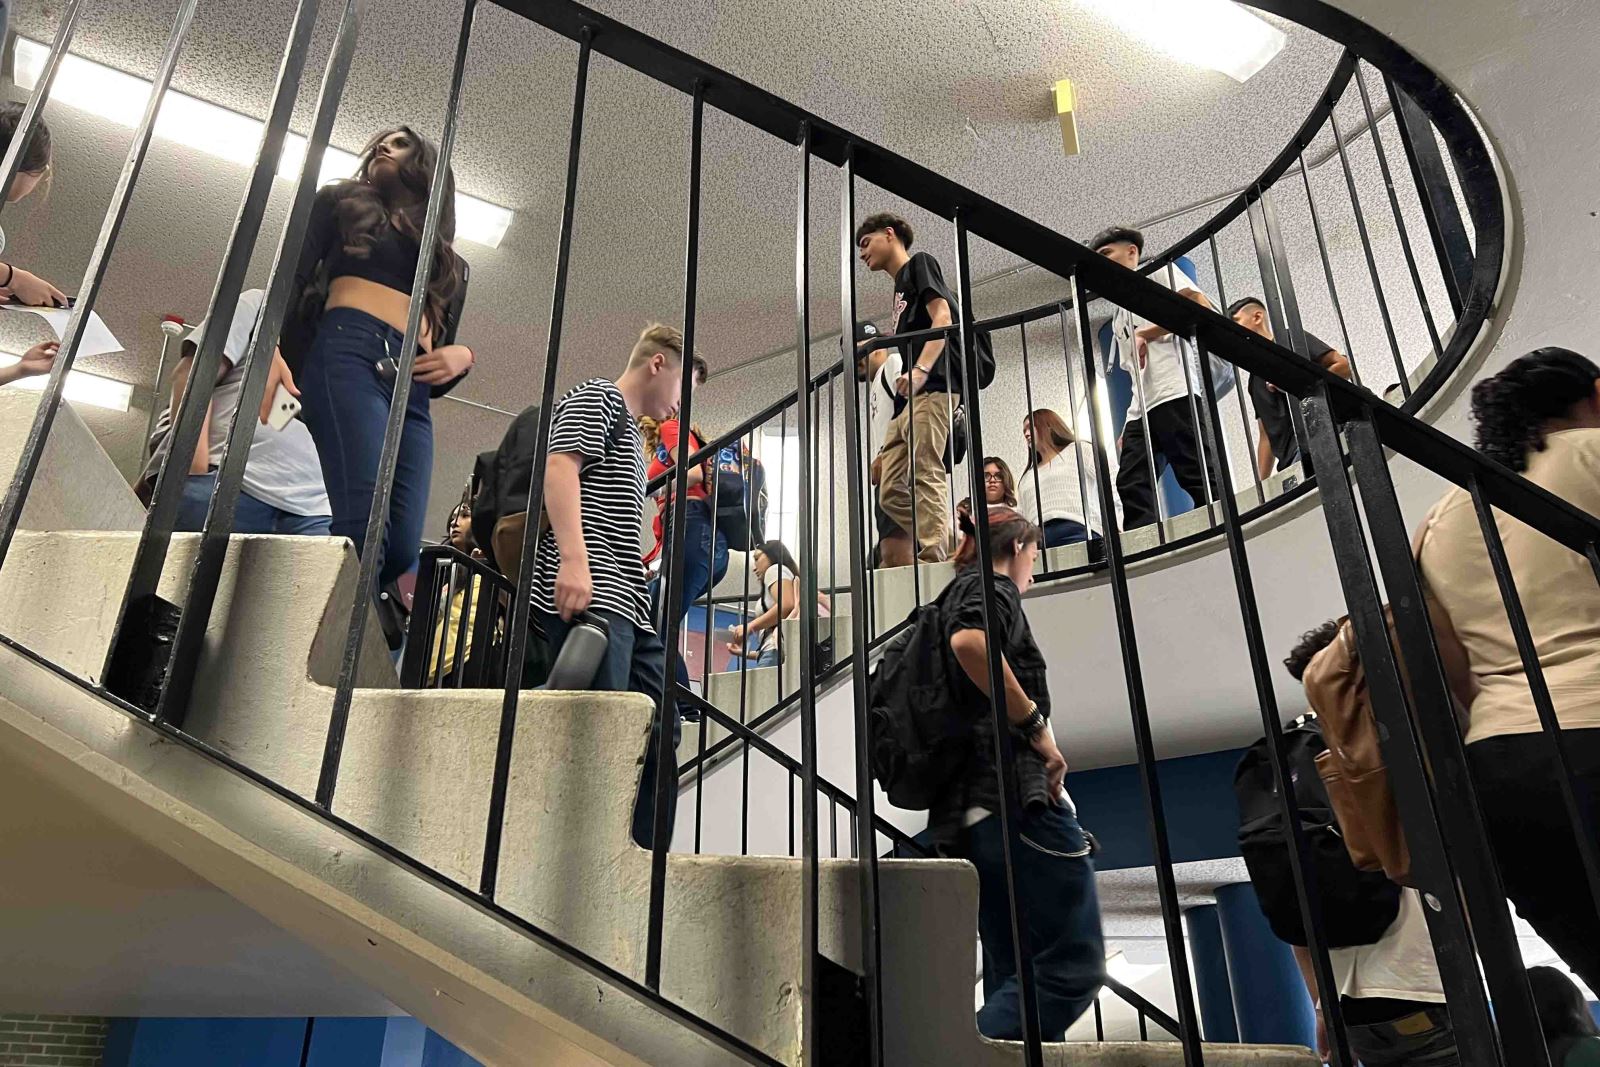 Cholla students move up and down the staircase on the first day of school